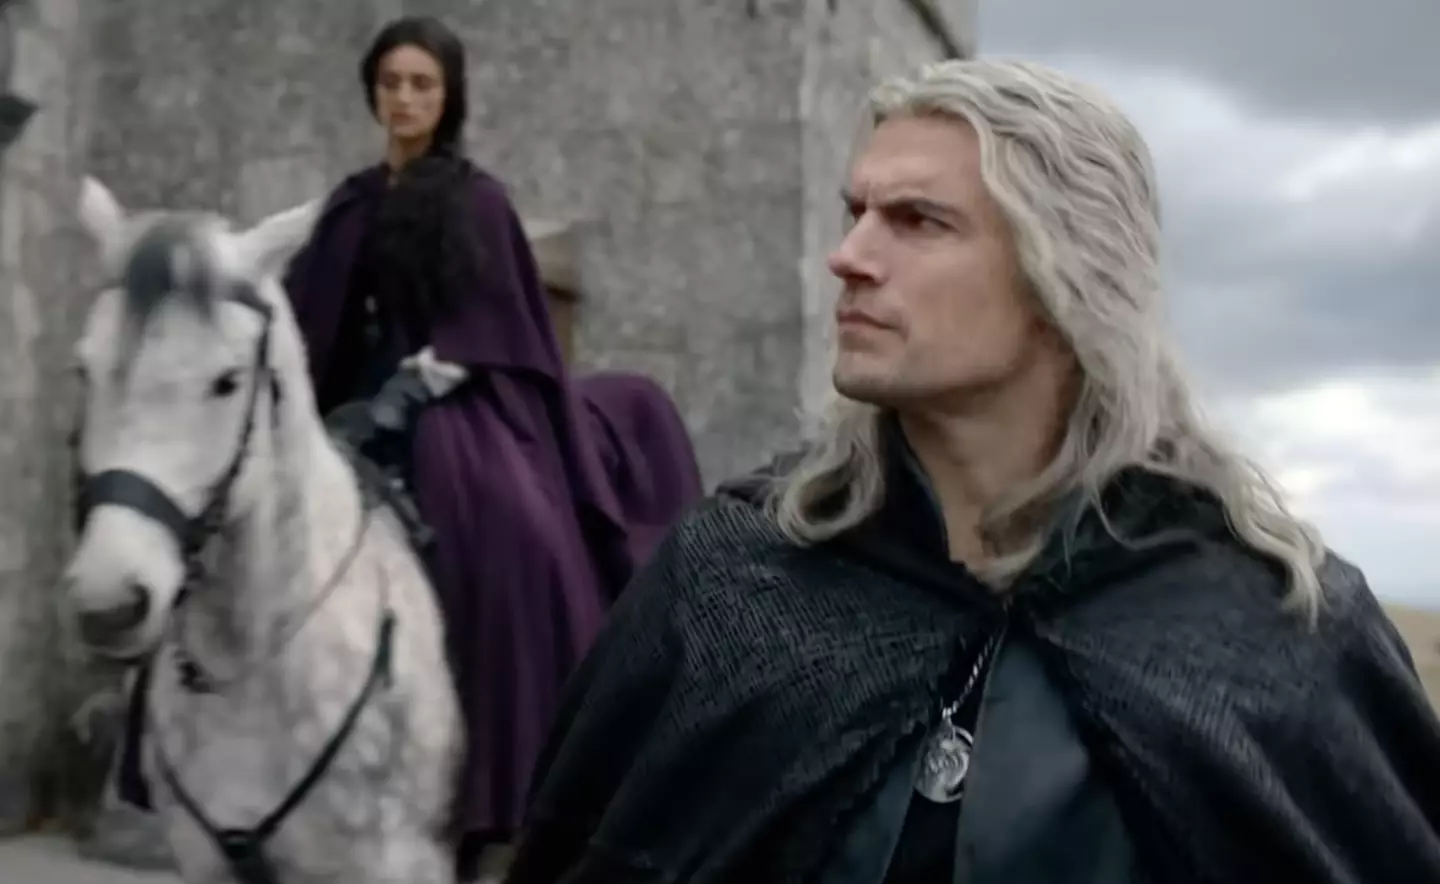 Henry Cavill as Geralt and Anya Chalotra as Yennfer in a still from the trailer.